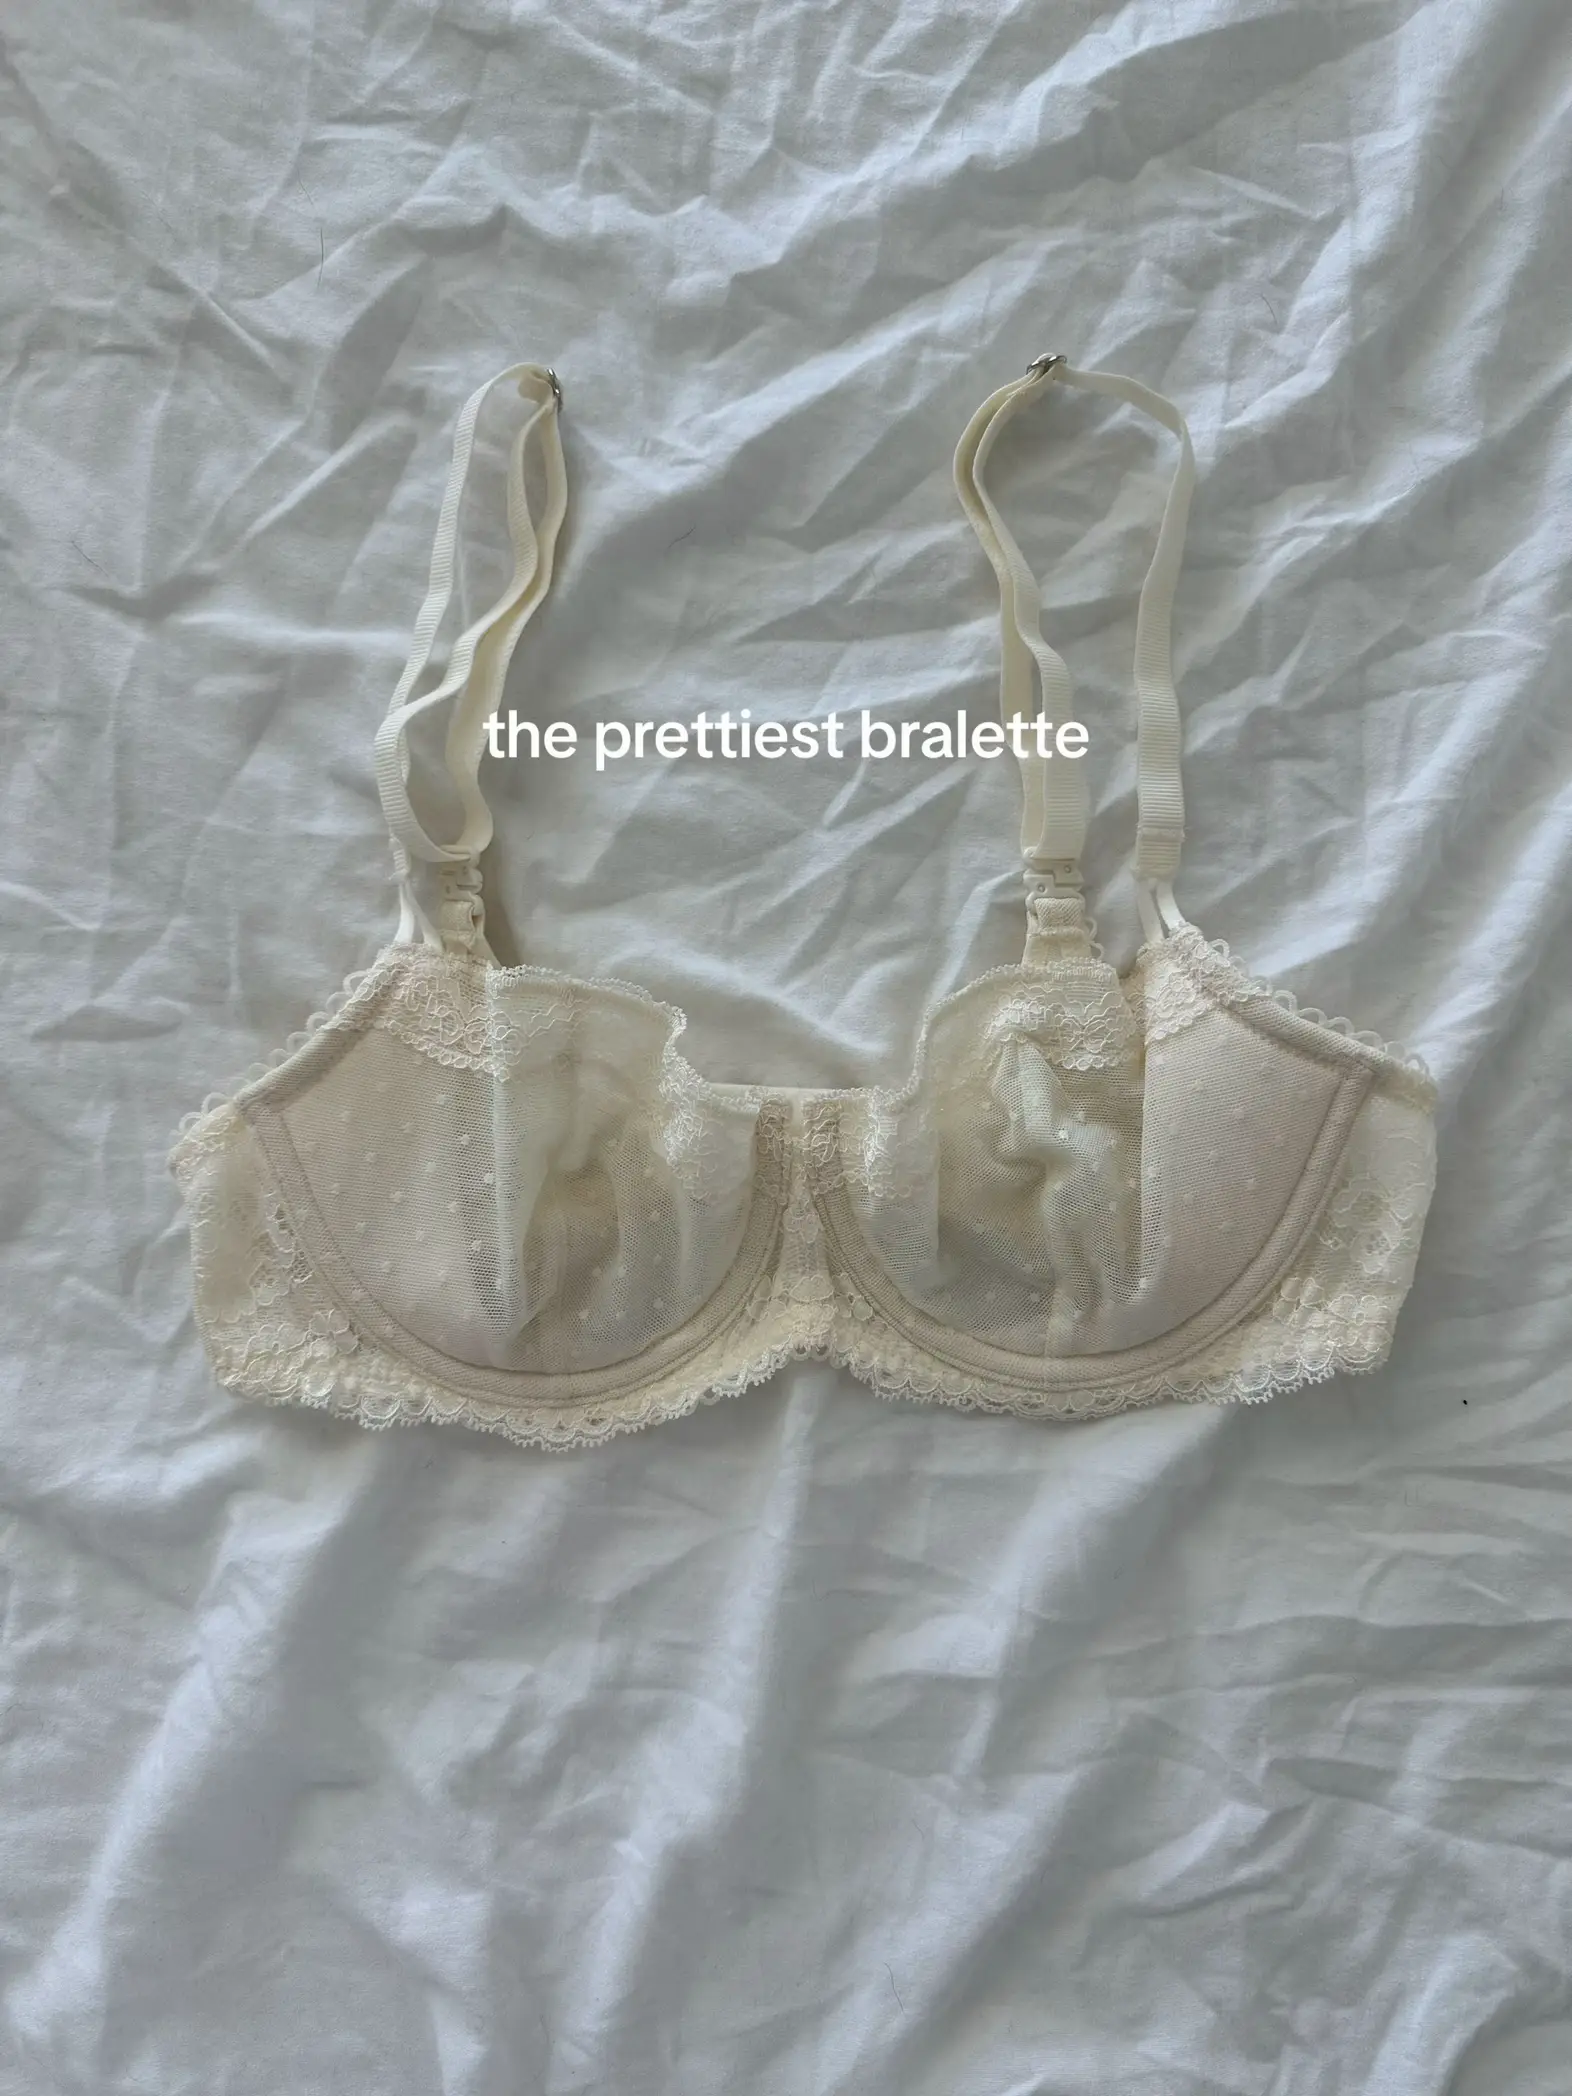 JOCKEY signature bra!! 💕Can be worn working out, - Depop